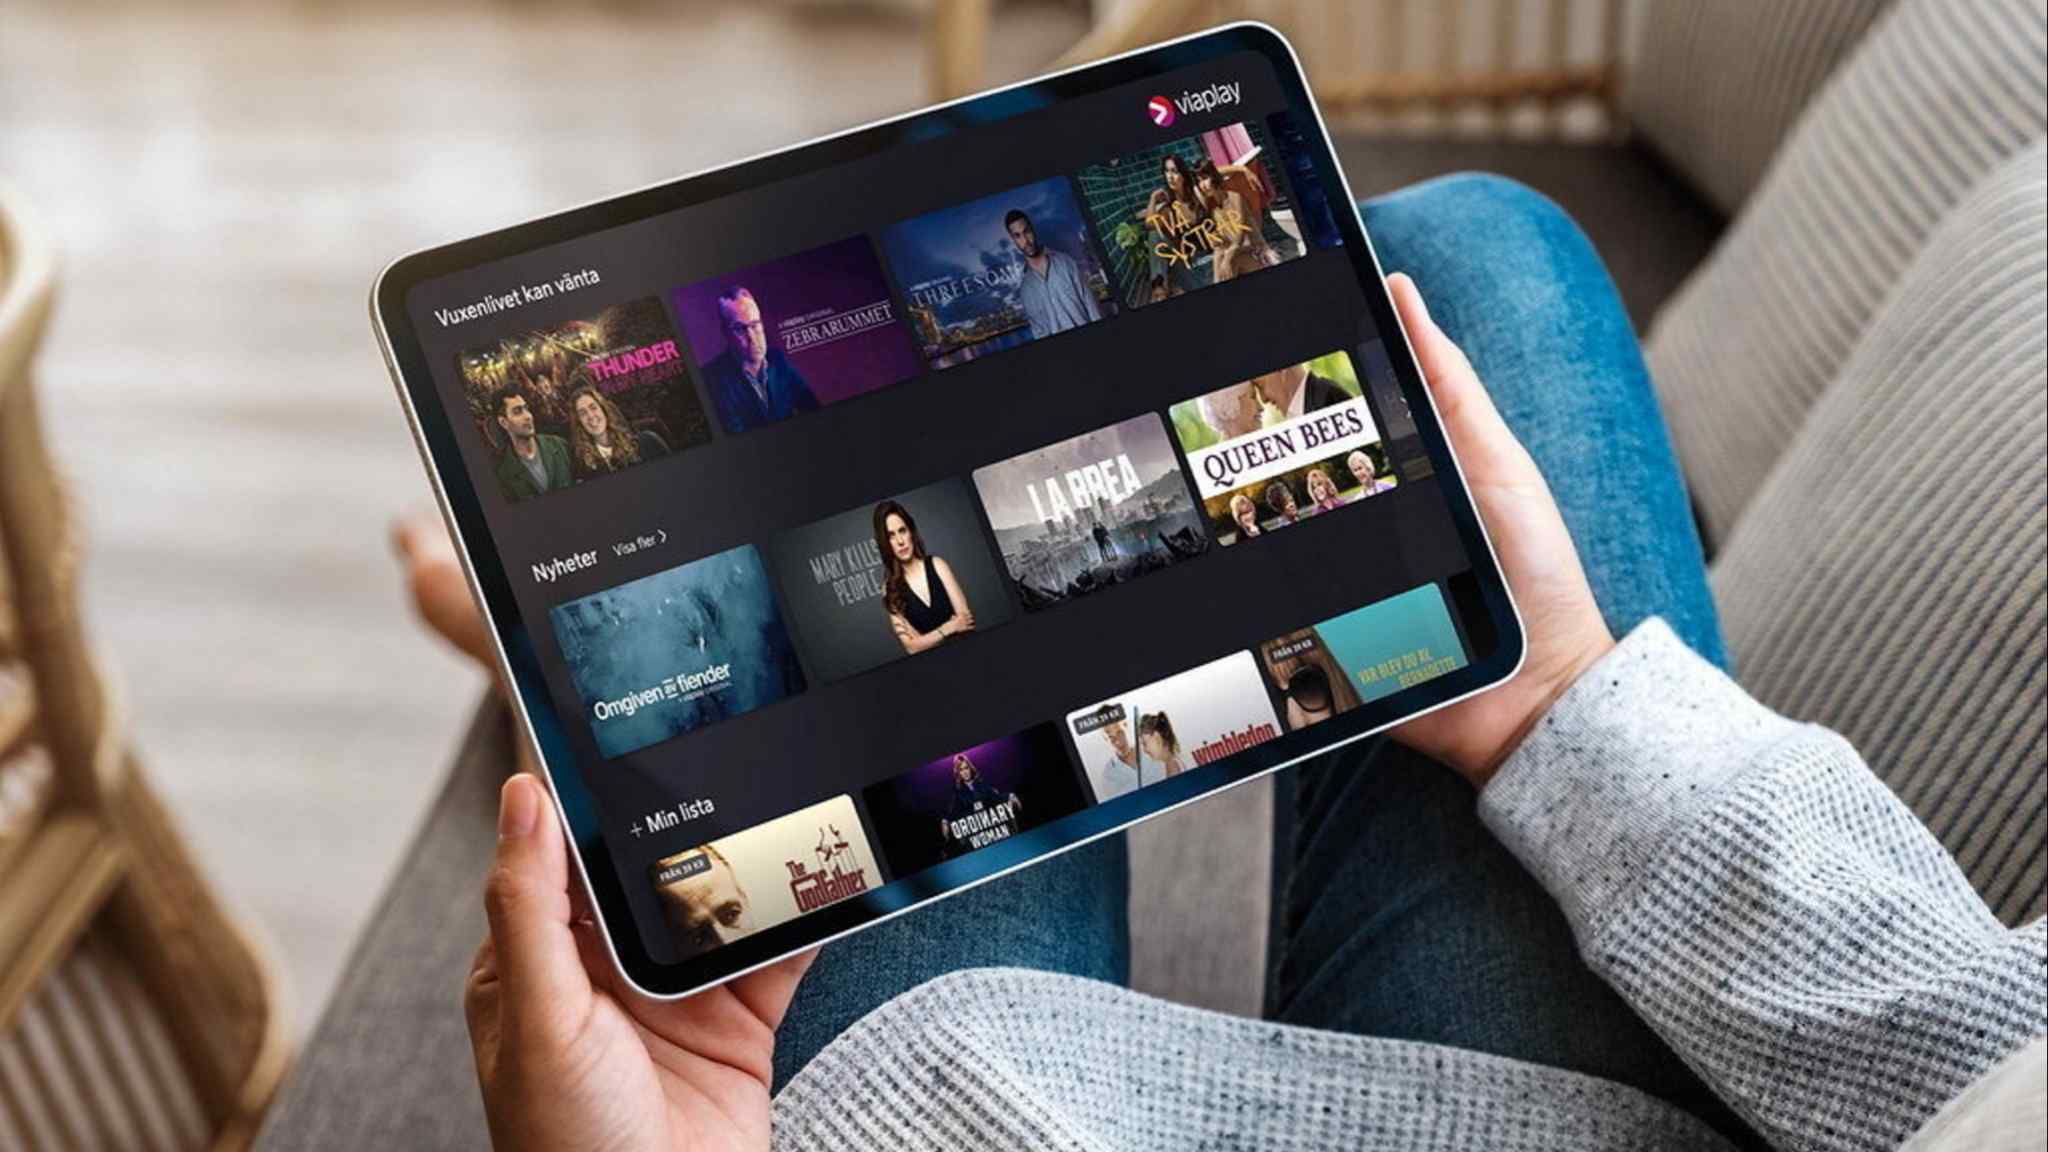 Netflix rival Viaplay ousts chief and issues profit warning